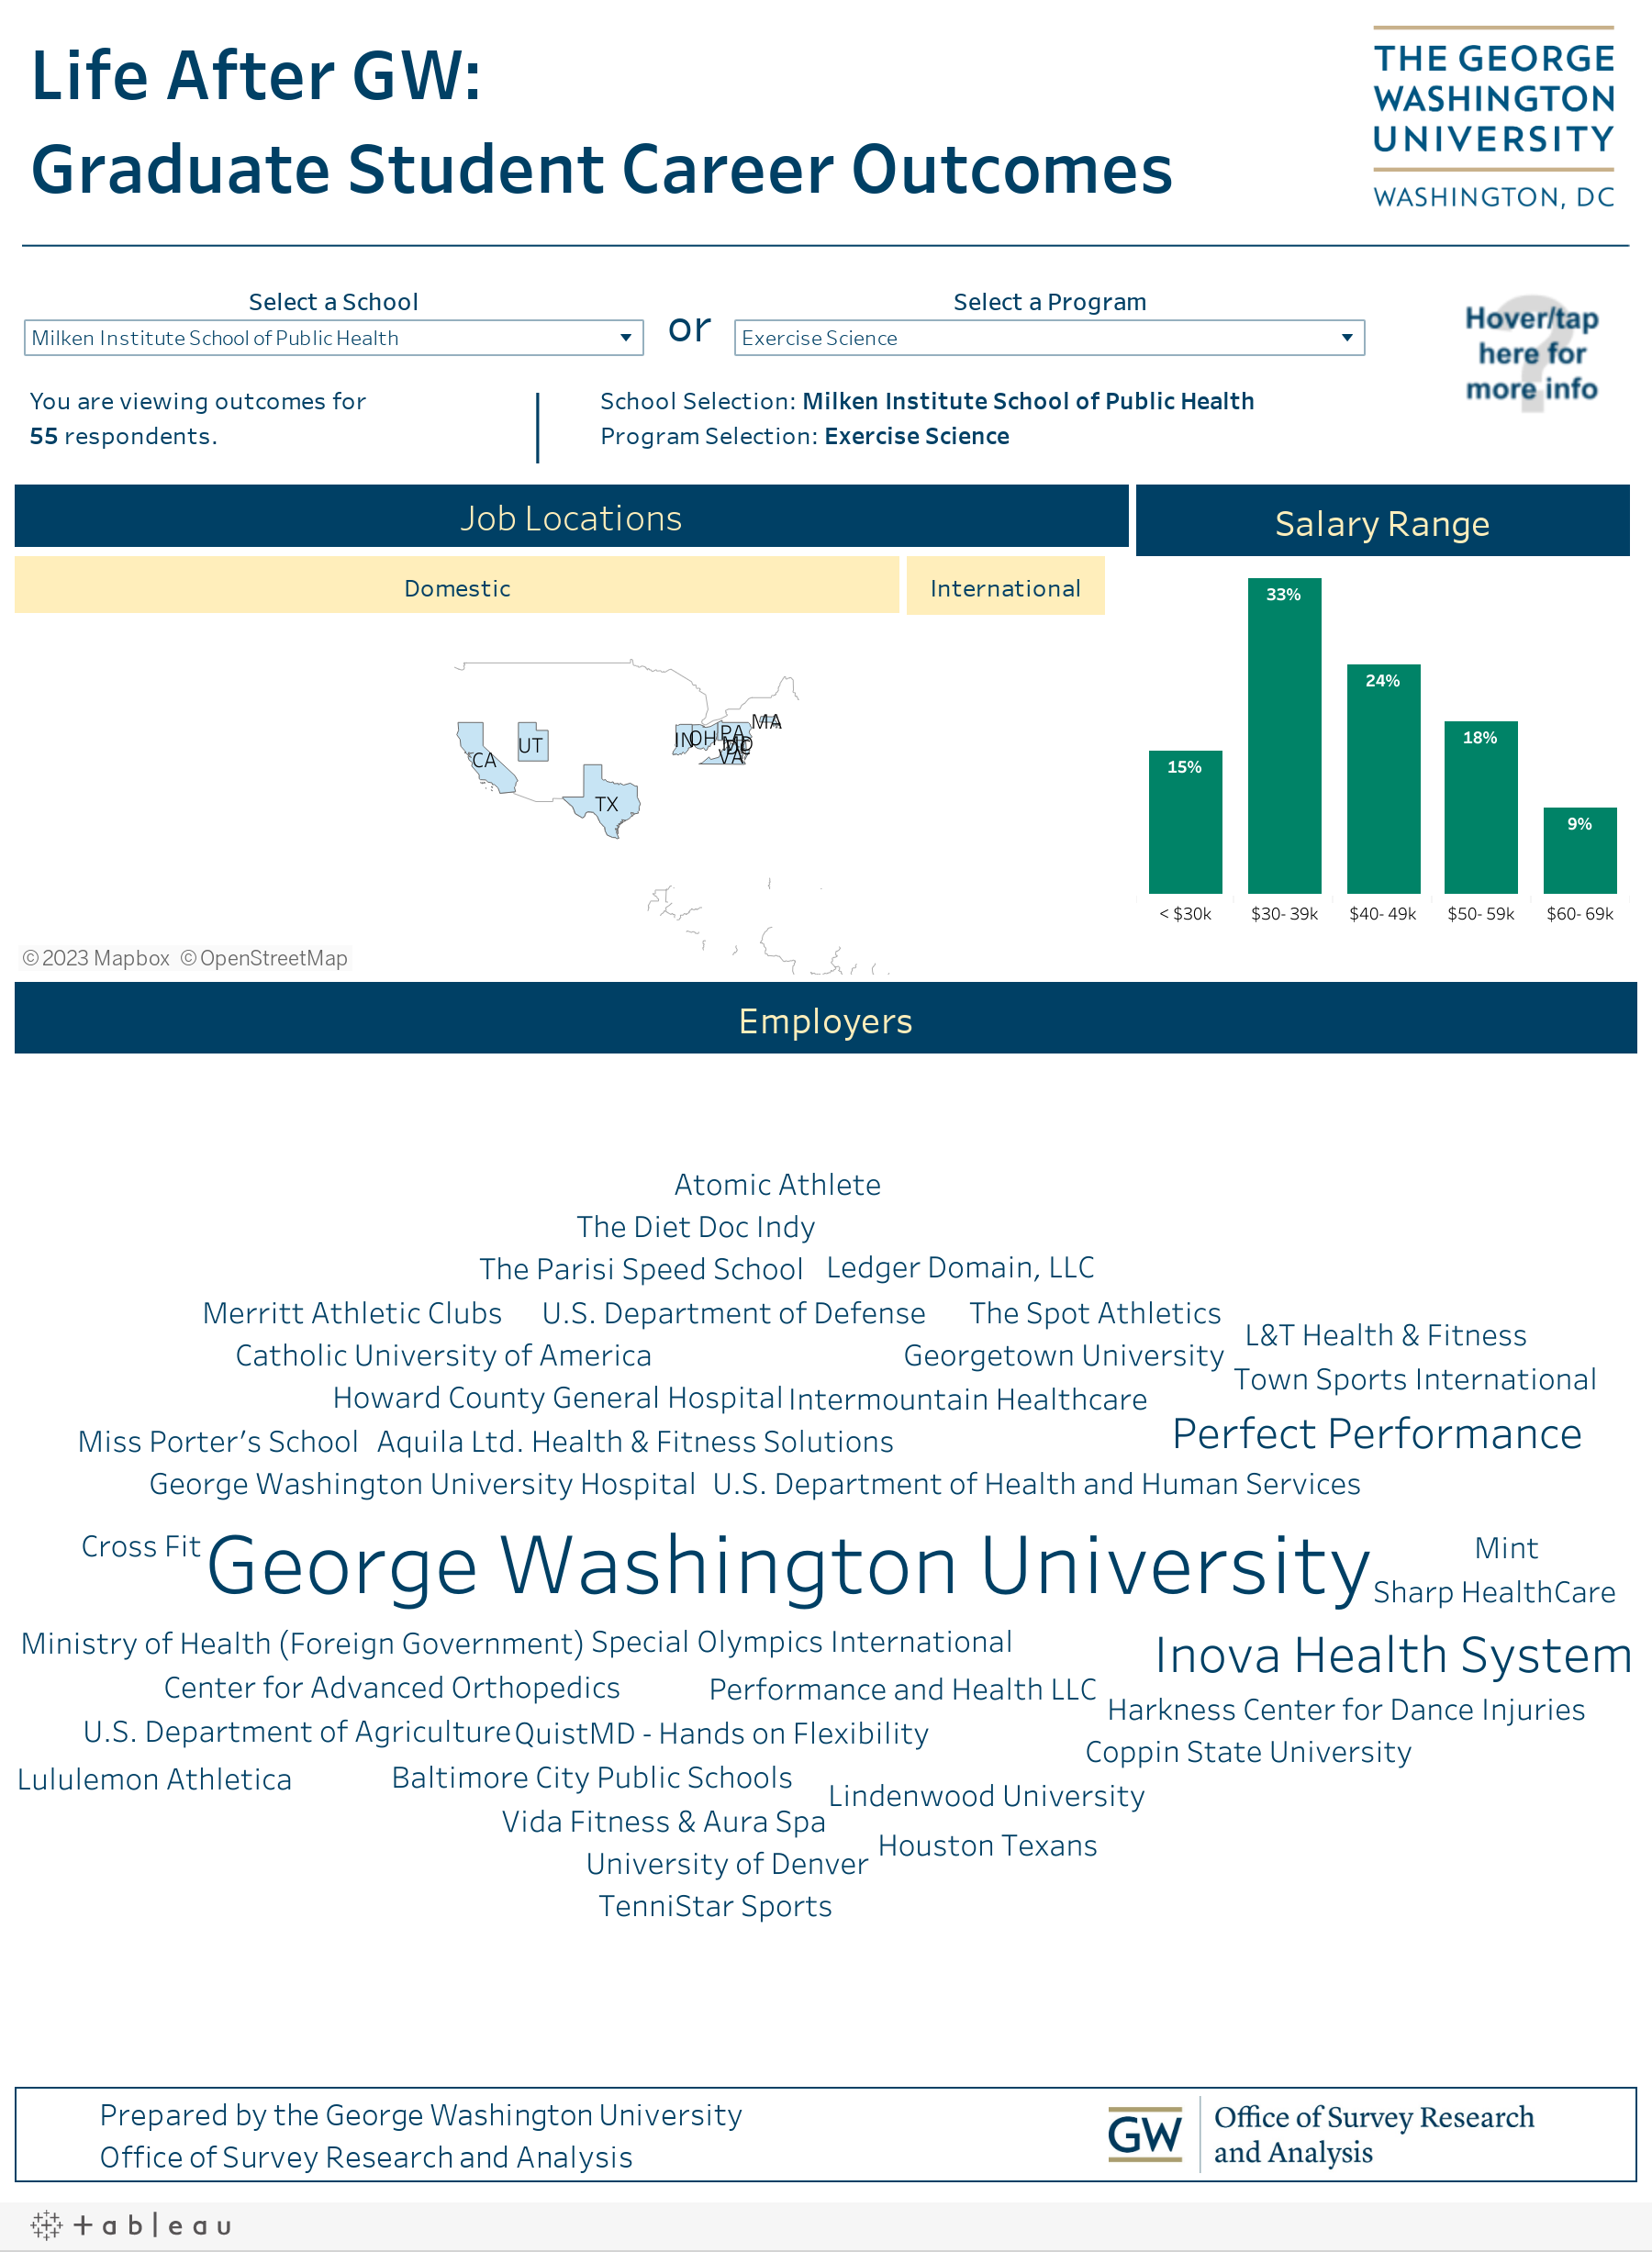  Life After GW: Graduate Student Career Outcomes 